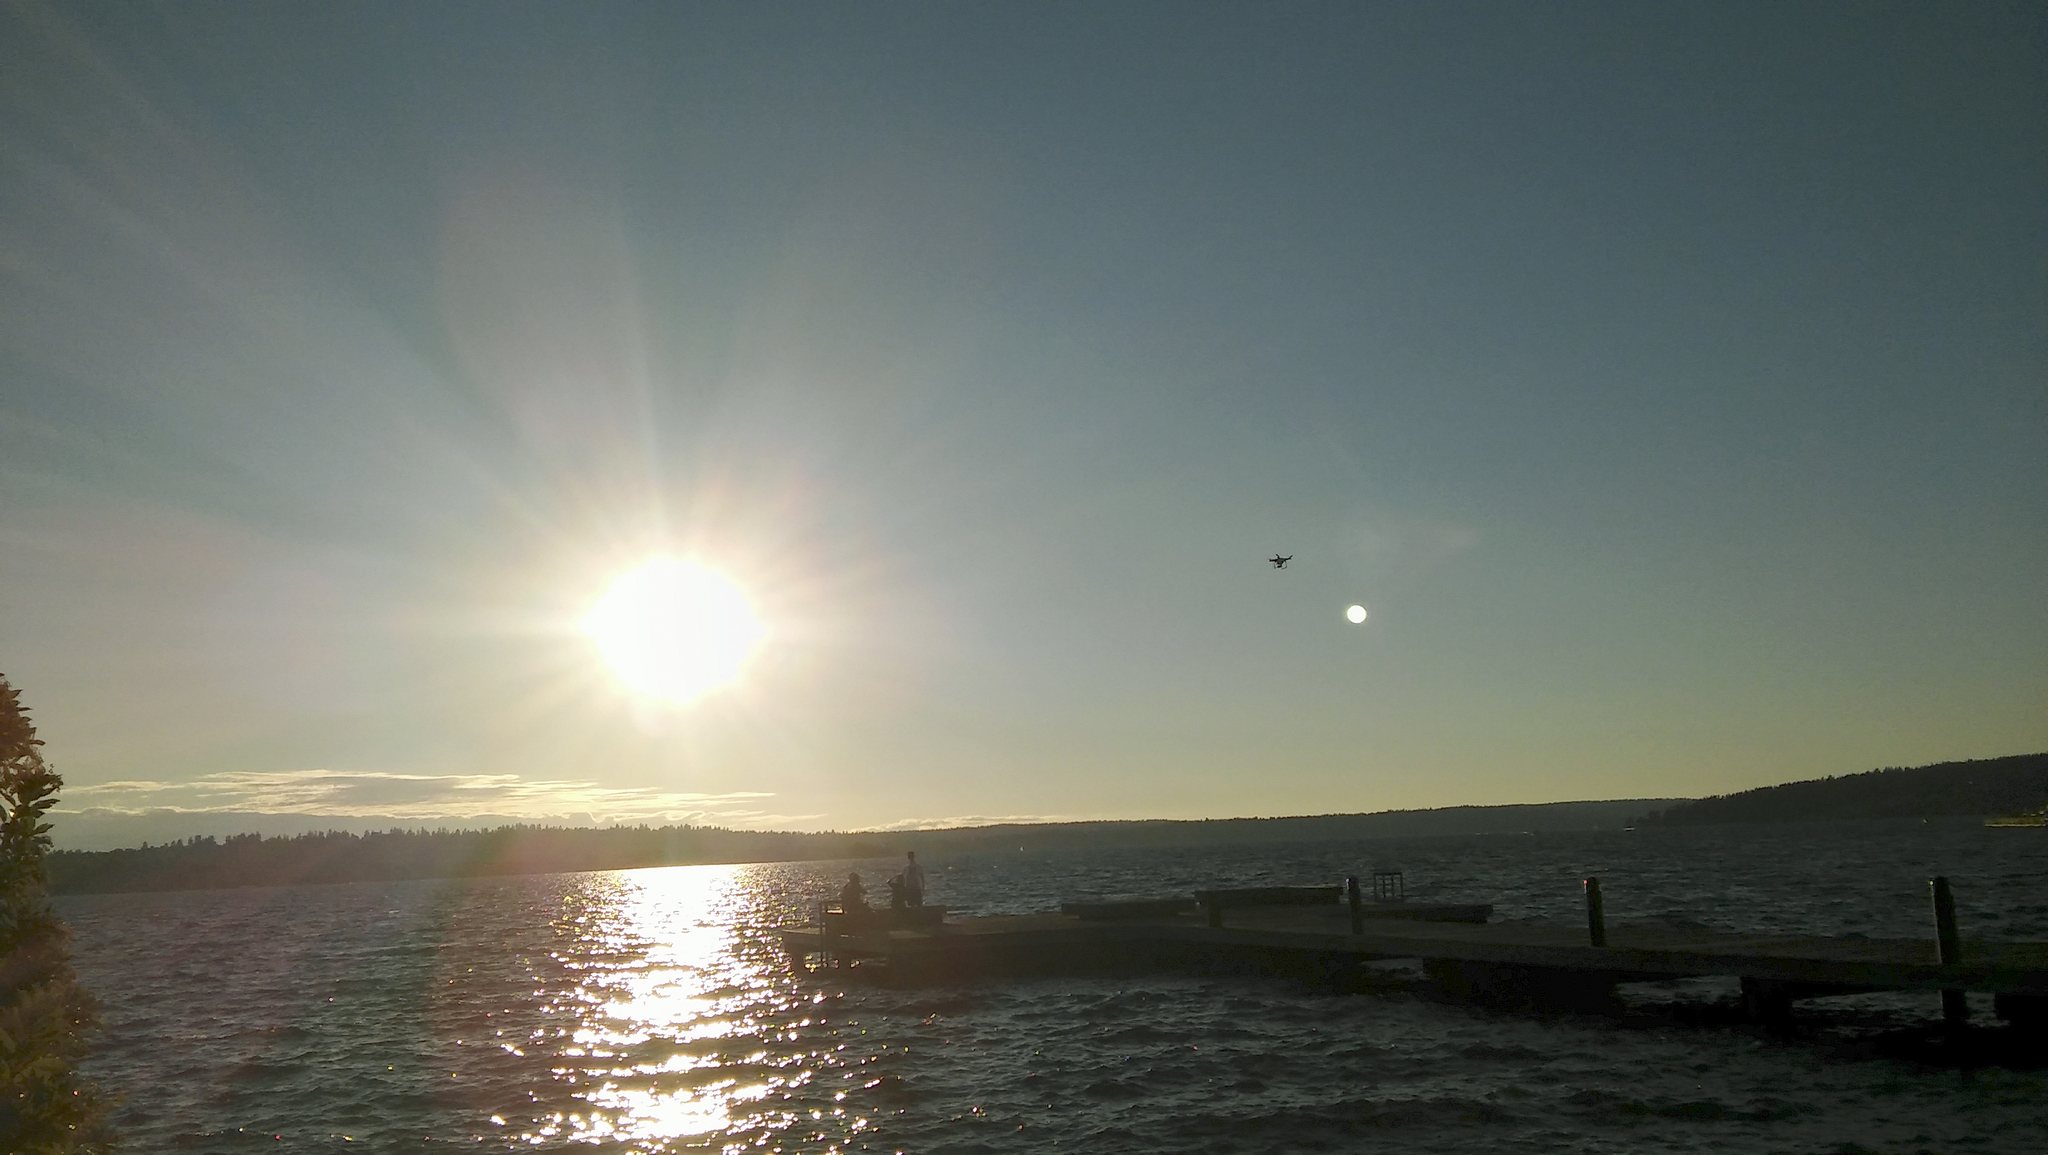 This photo taken on July 23 on the Kirkland waterfront. It shows a daisy around the setting sun